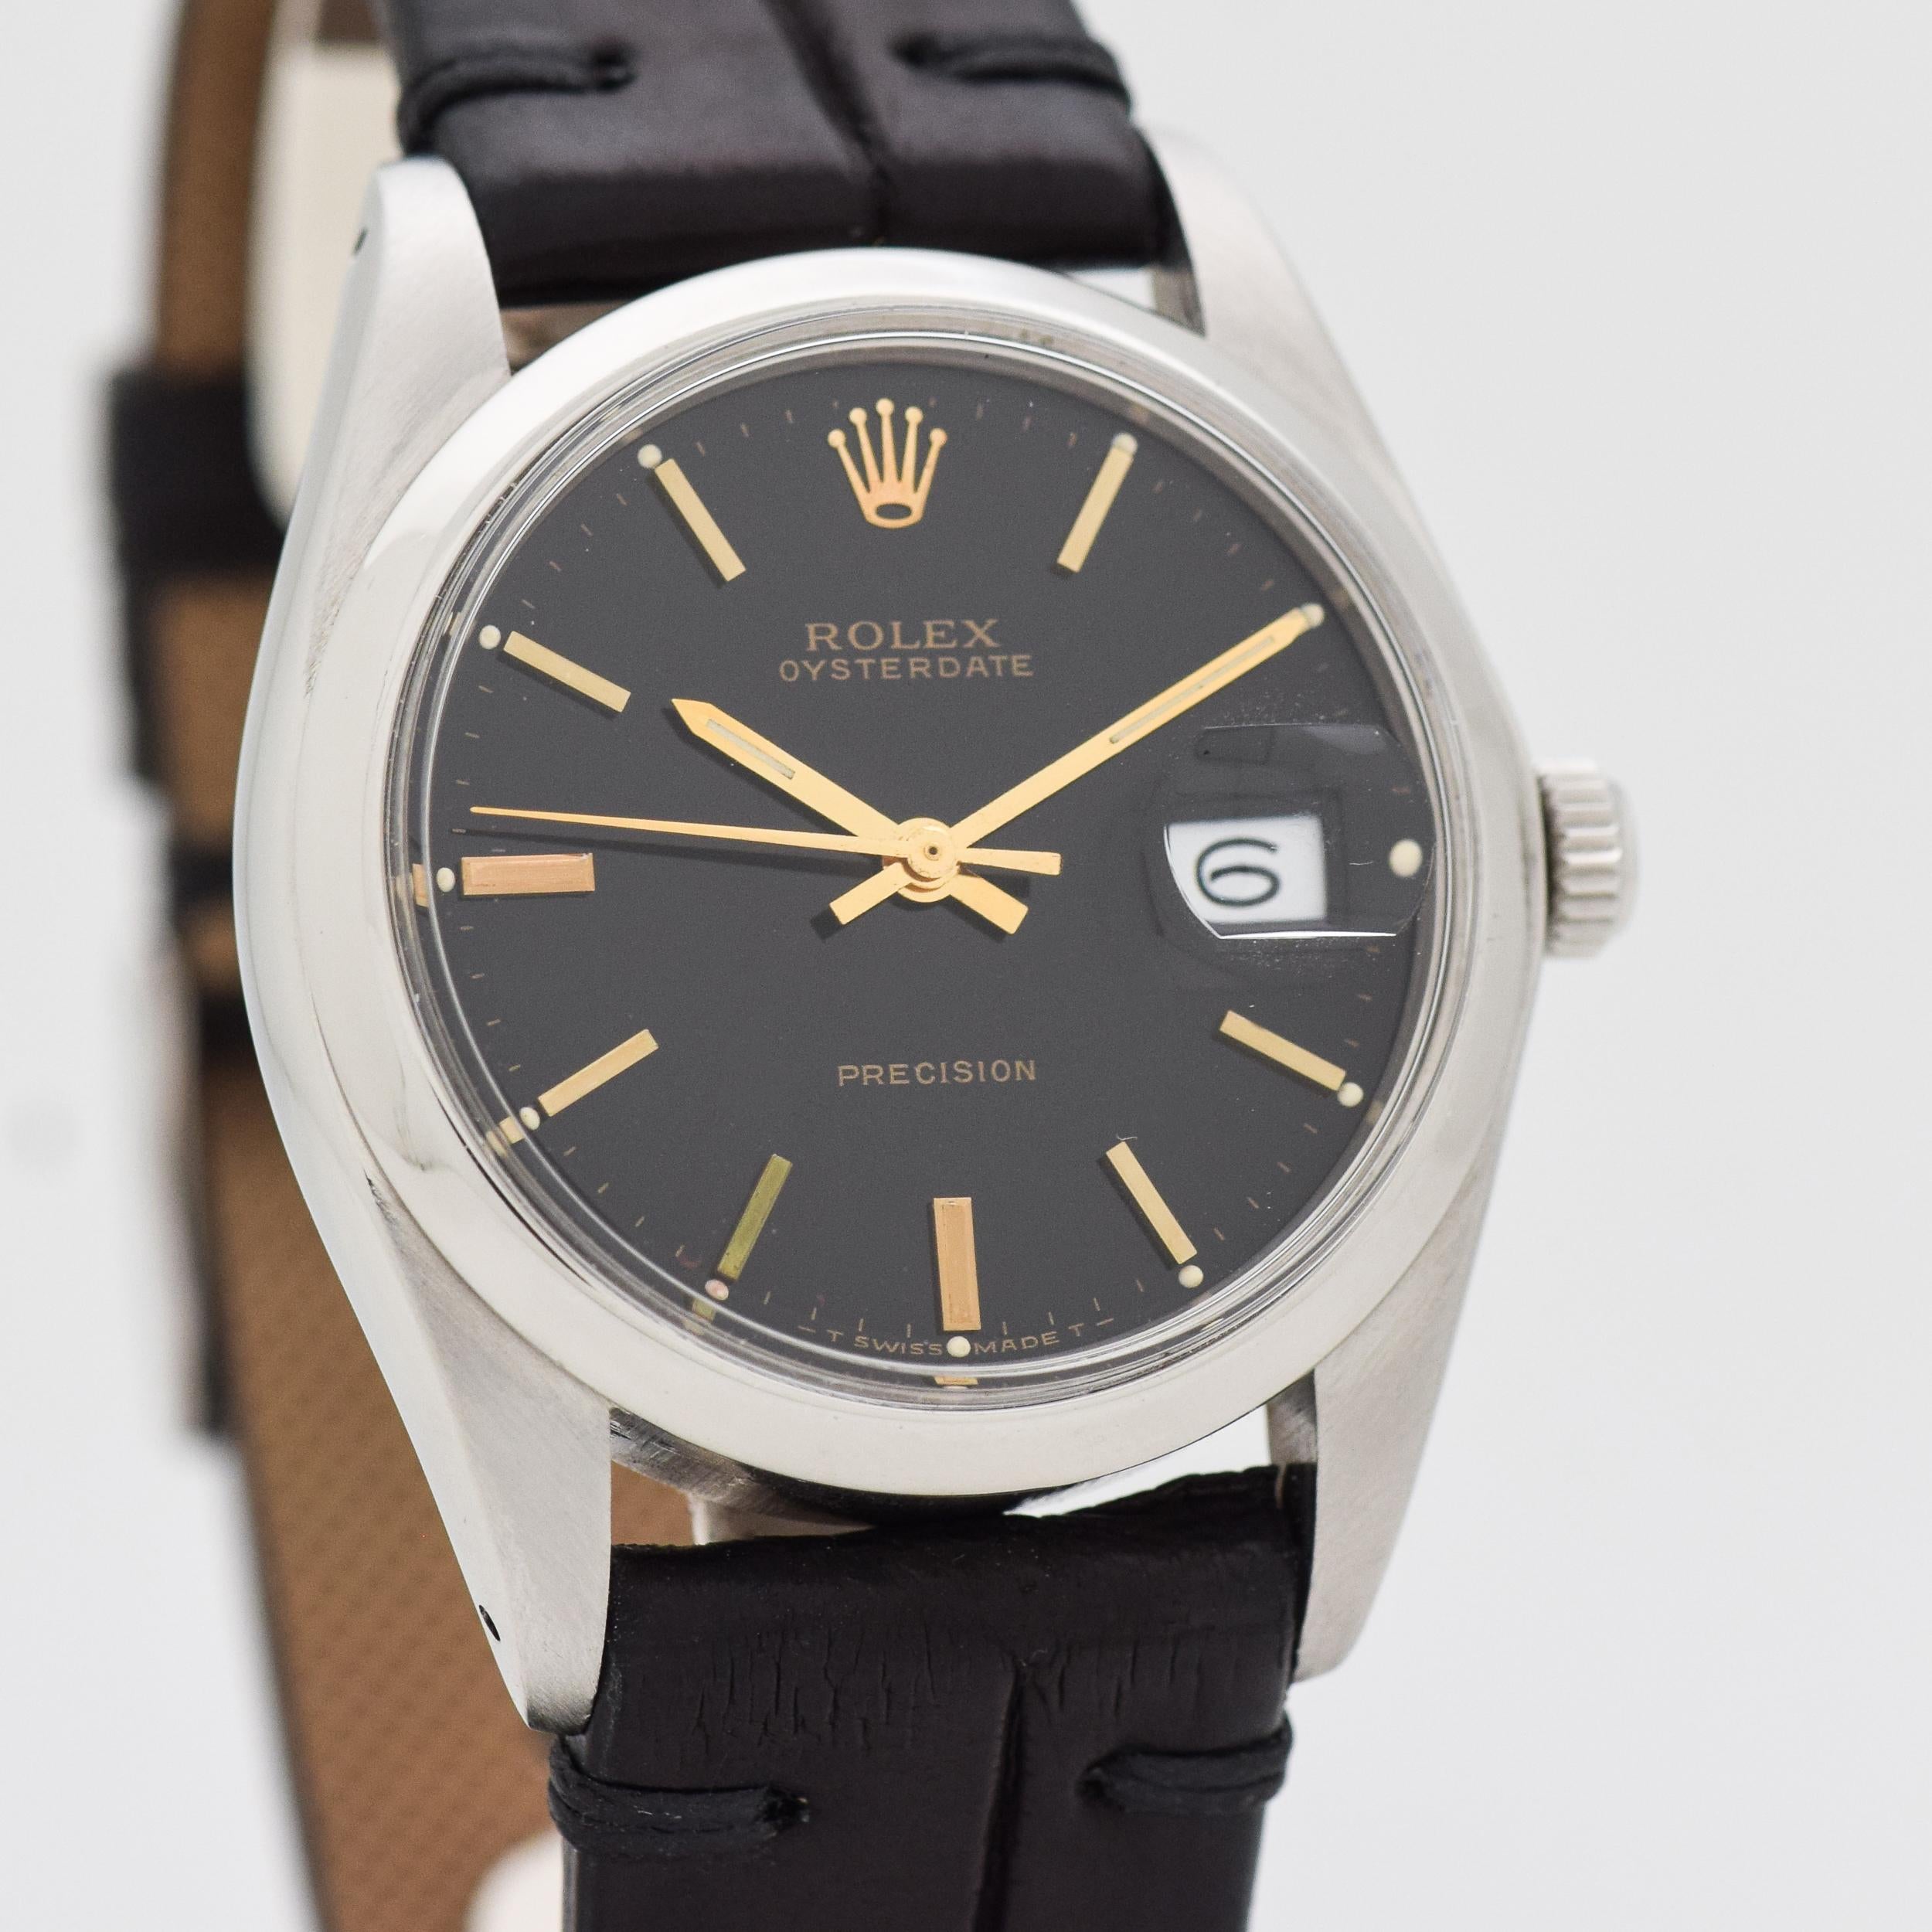 1972 Vintage Rolex Oysterdate Ref. 6694 Stainless Steel watch with Original Black Dial with Applied Gold Color Stick/Bar/Baton Markers. Case size, 34mm x 41mm lug to lug (1.34 in. x 1.61 in.) - Powered by a 17-jewel, manual caliber movement. Triple